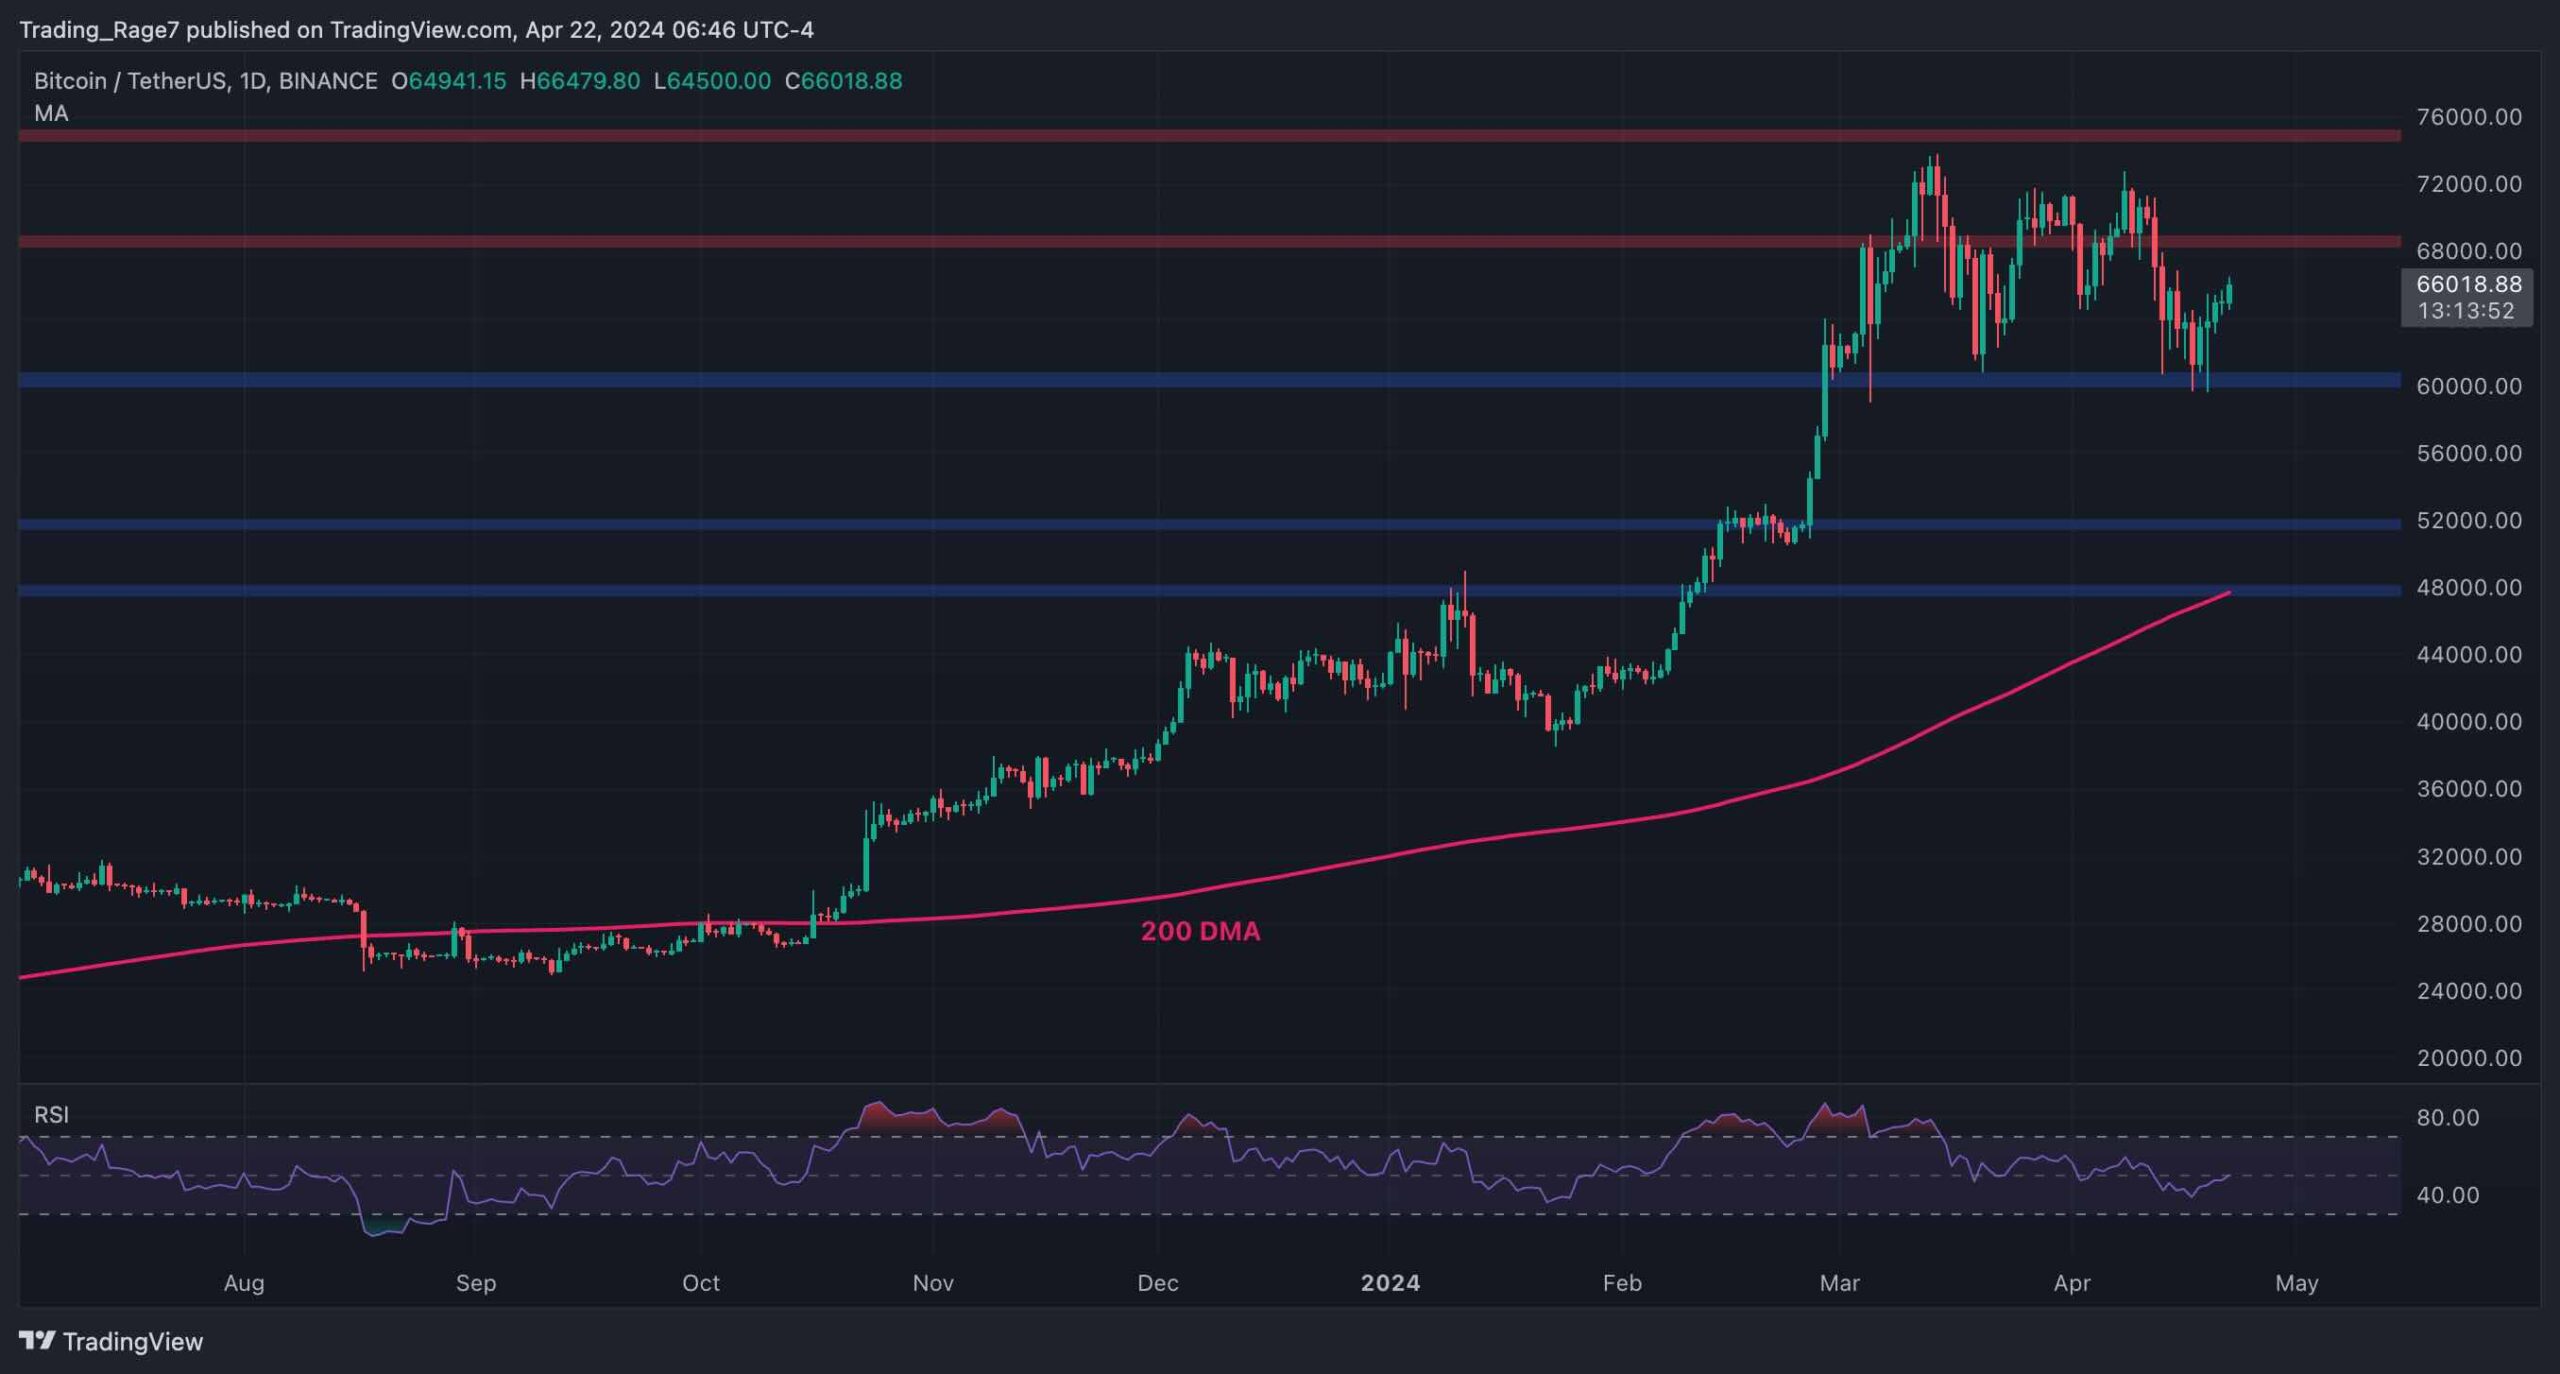 Is Bitcoin Ready to Rally Again or is Another Drop to $60K Coming? (BTC Price Analysis)